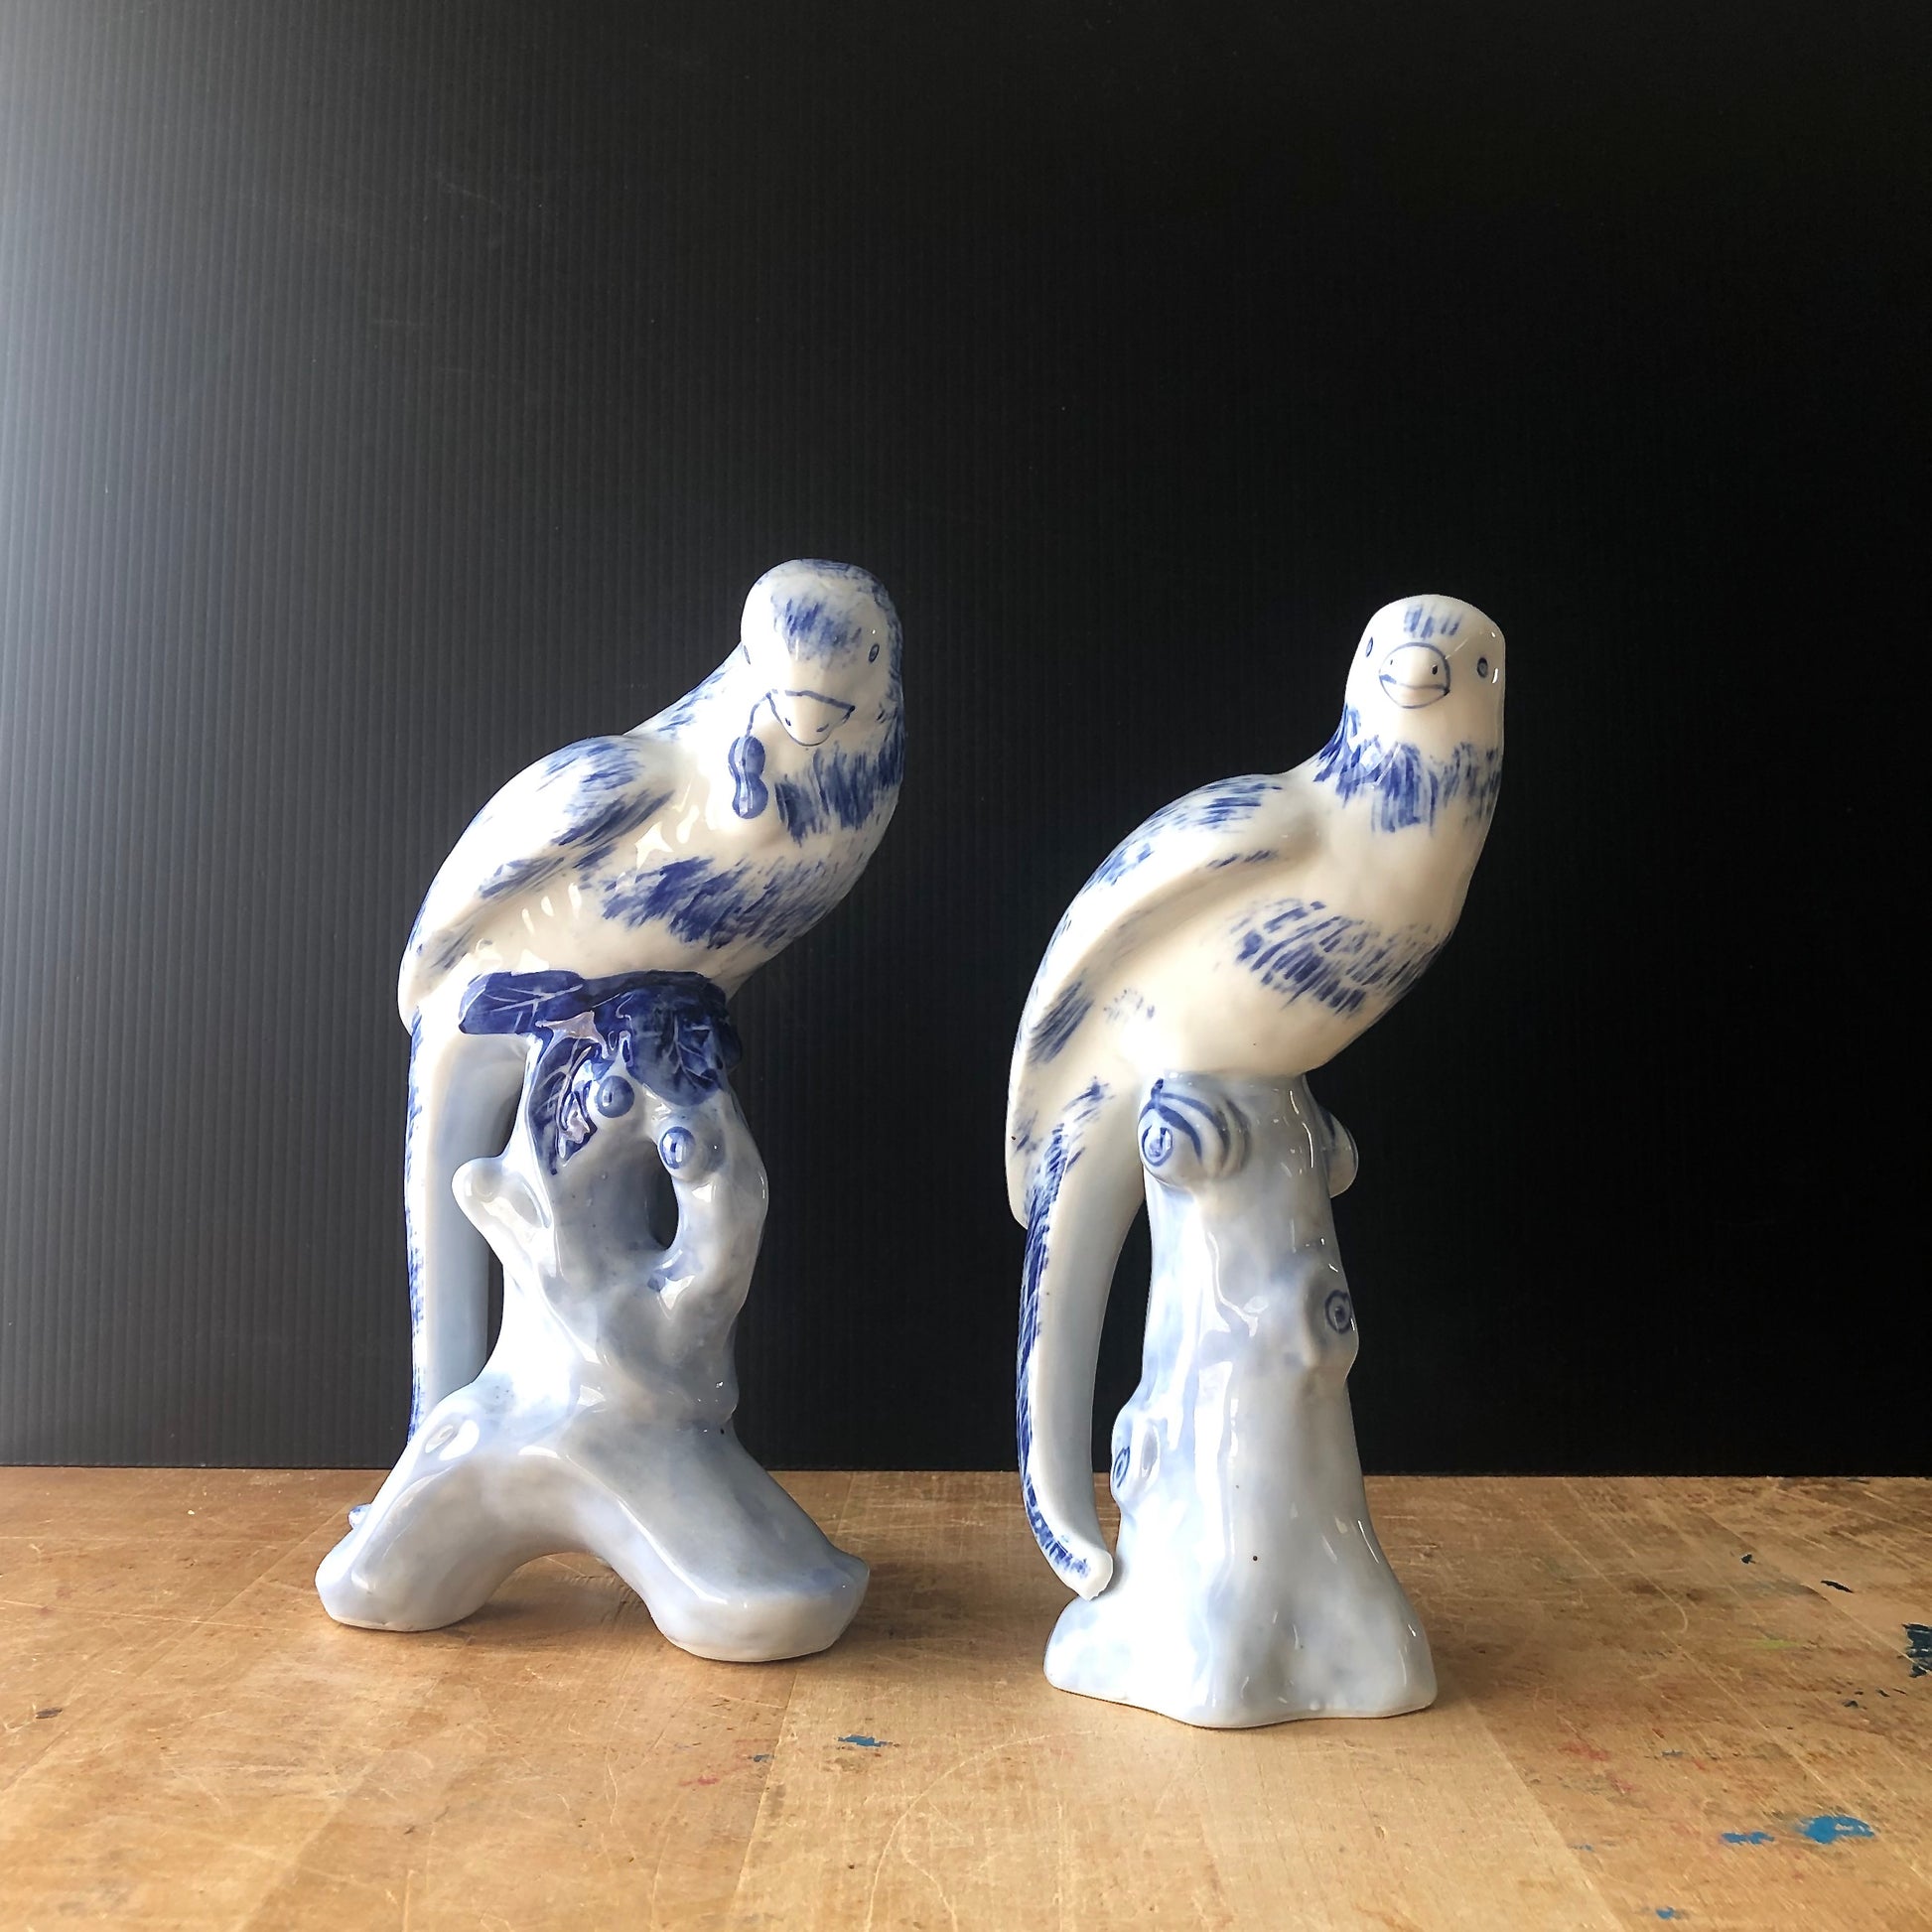 Blue and White Asian Parrot Figurines (c.1940s)